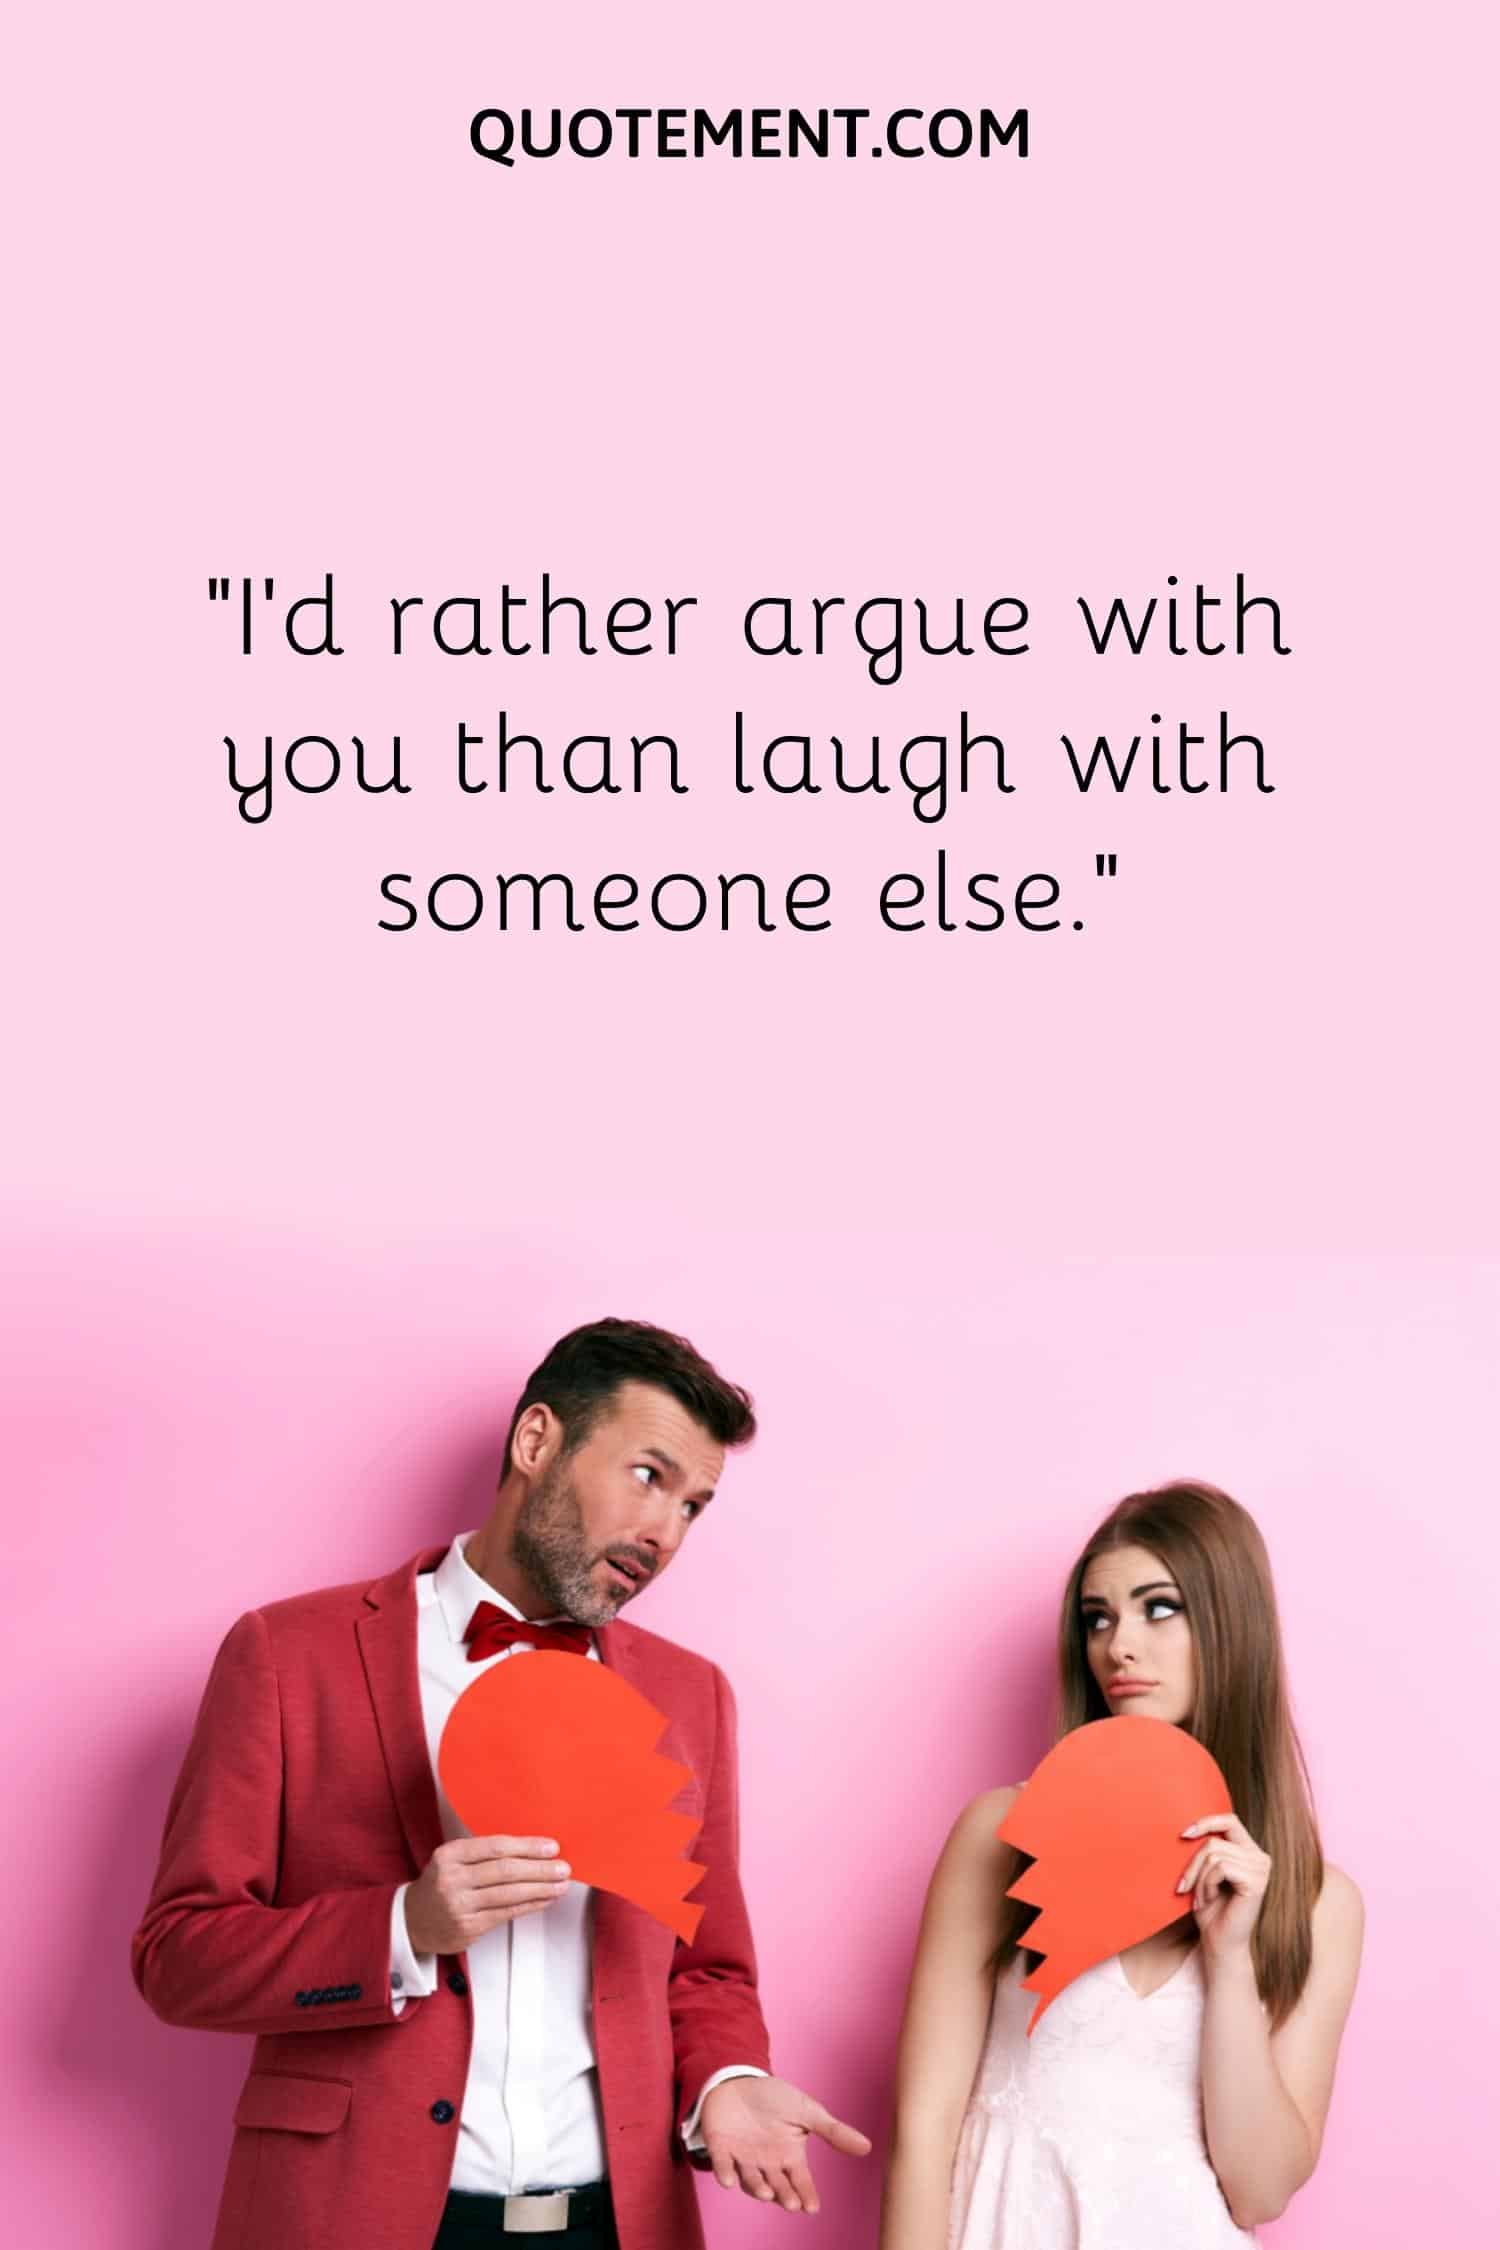 “I’d rather argue with you than laugh with someone else.”